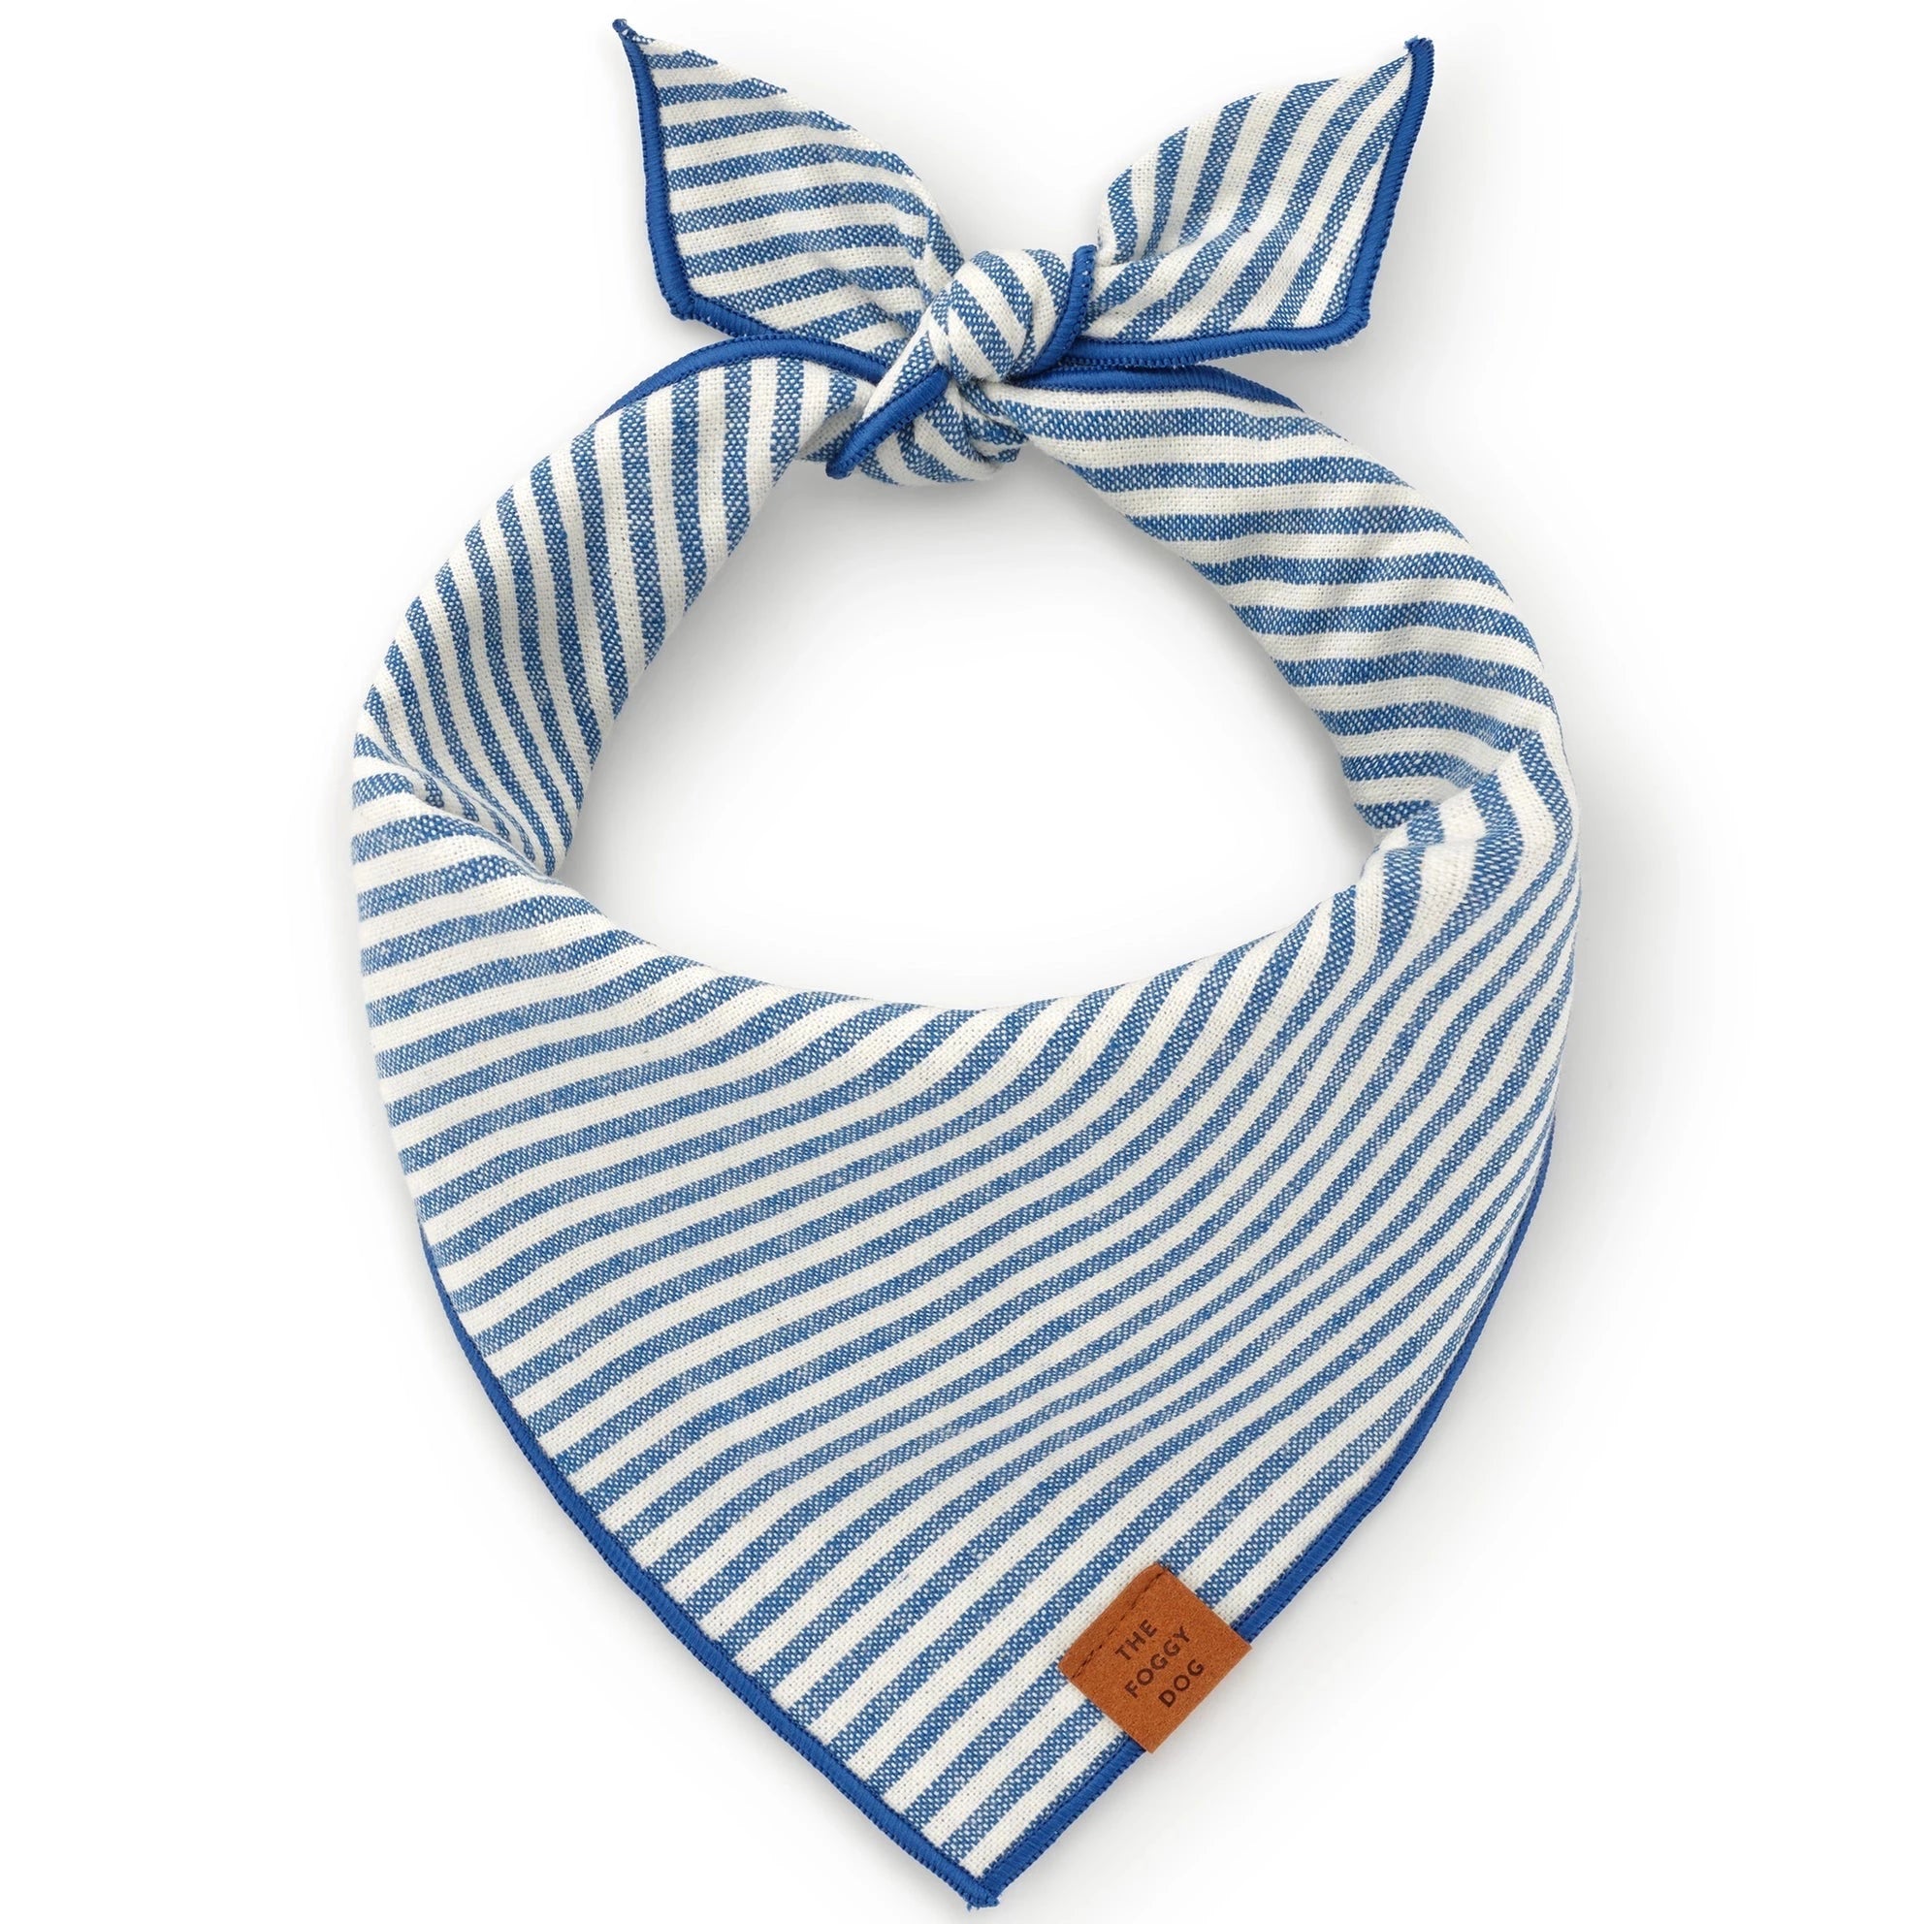 blue and white stripped dog bandana. Has blue hem and brown leather tag on the edge